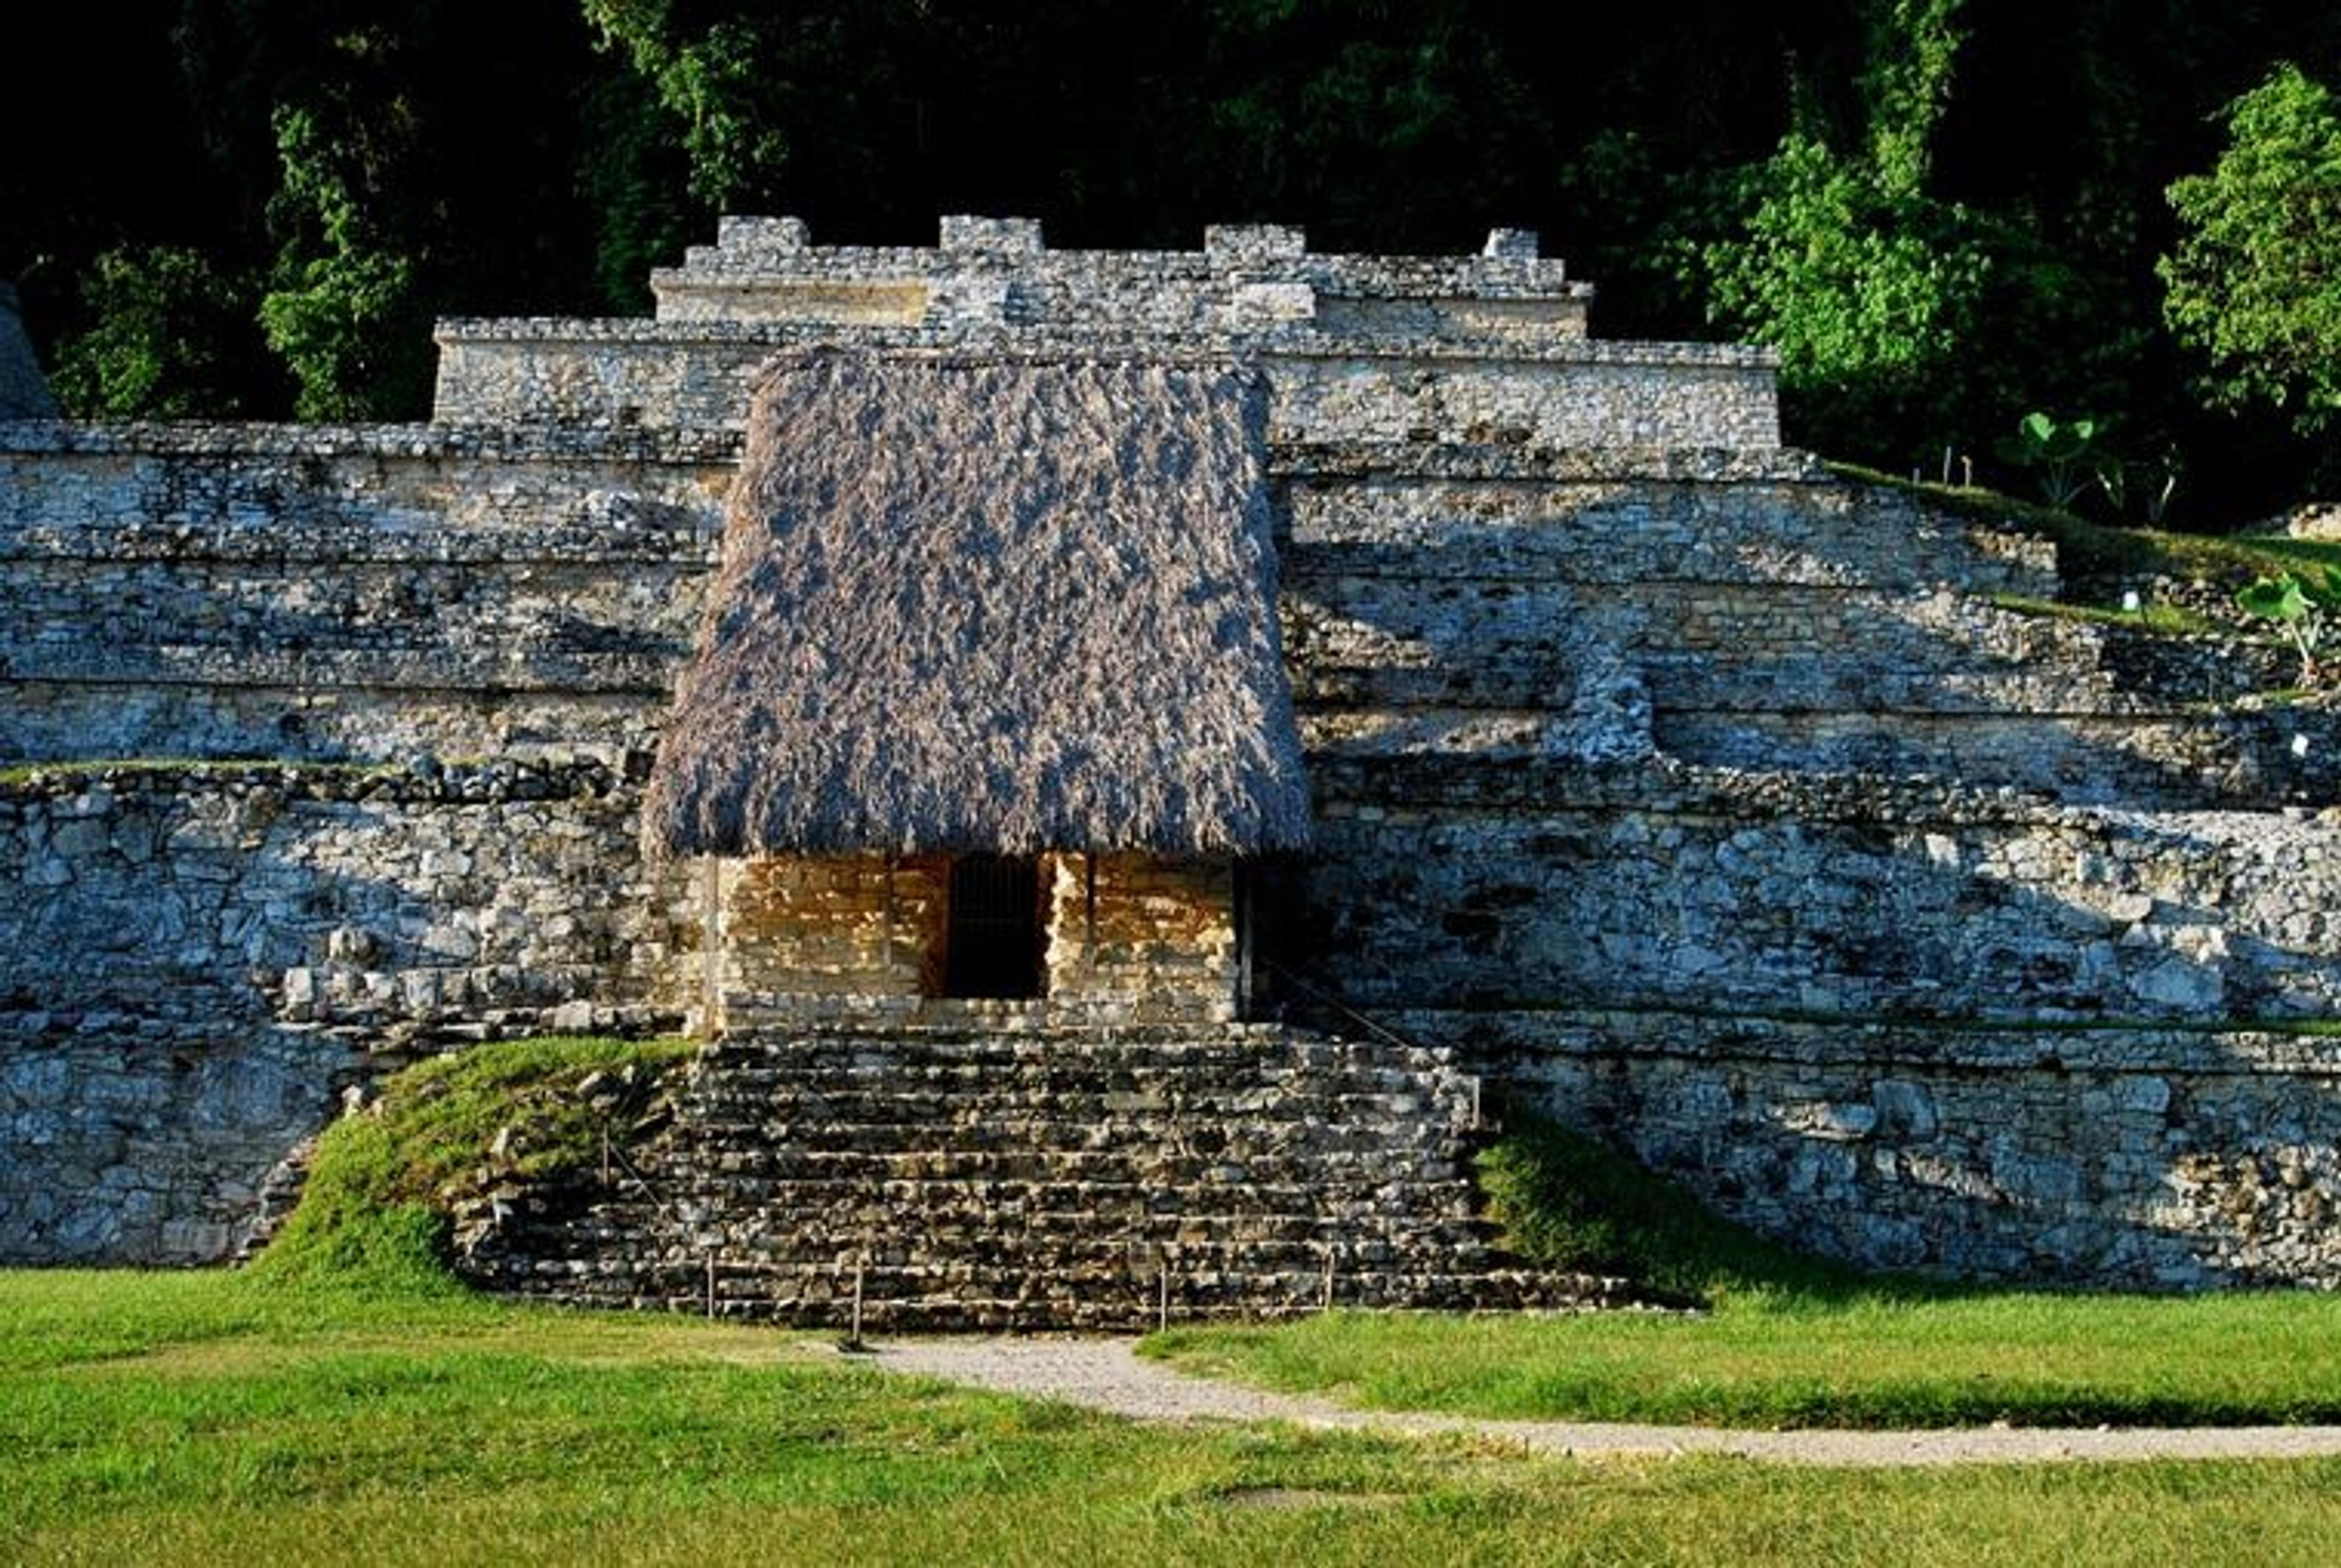 Modern-day photo of an ancient Mexican temple